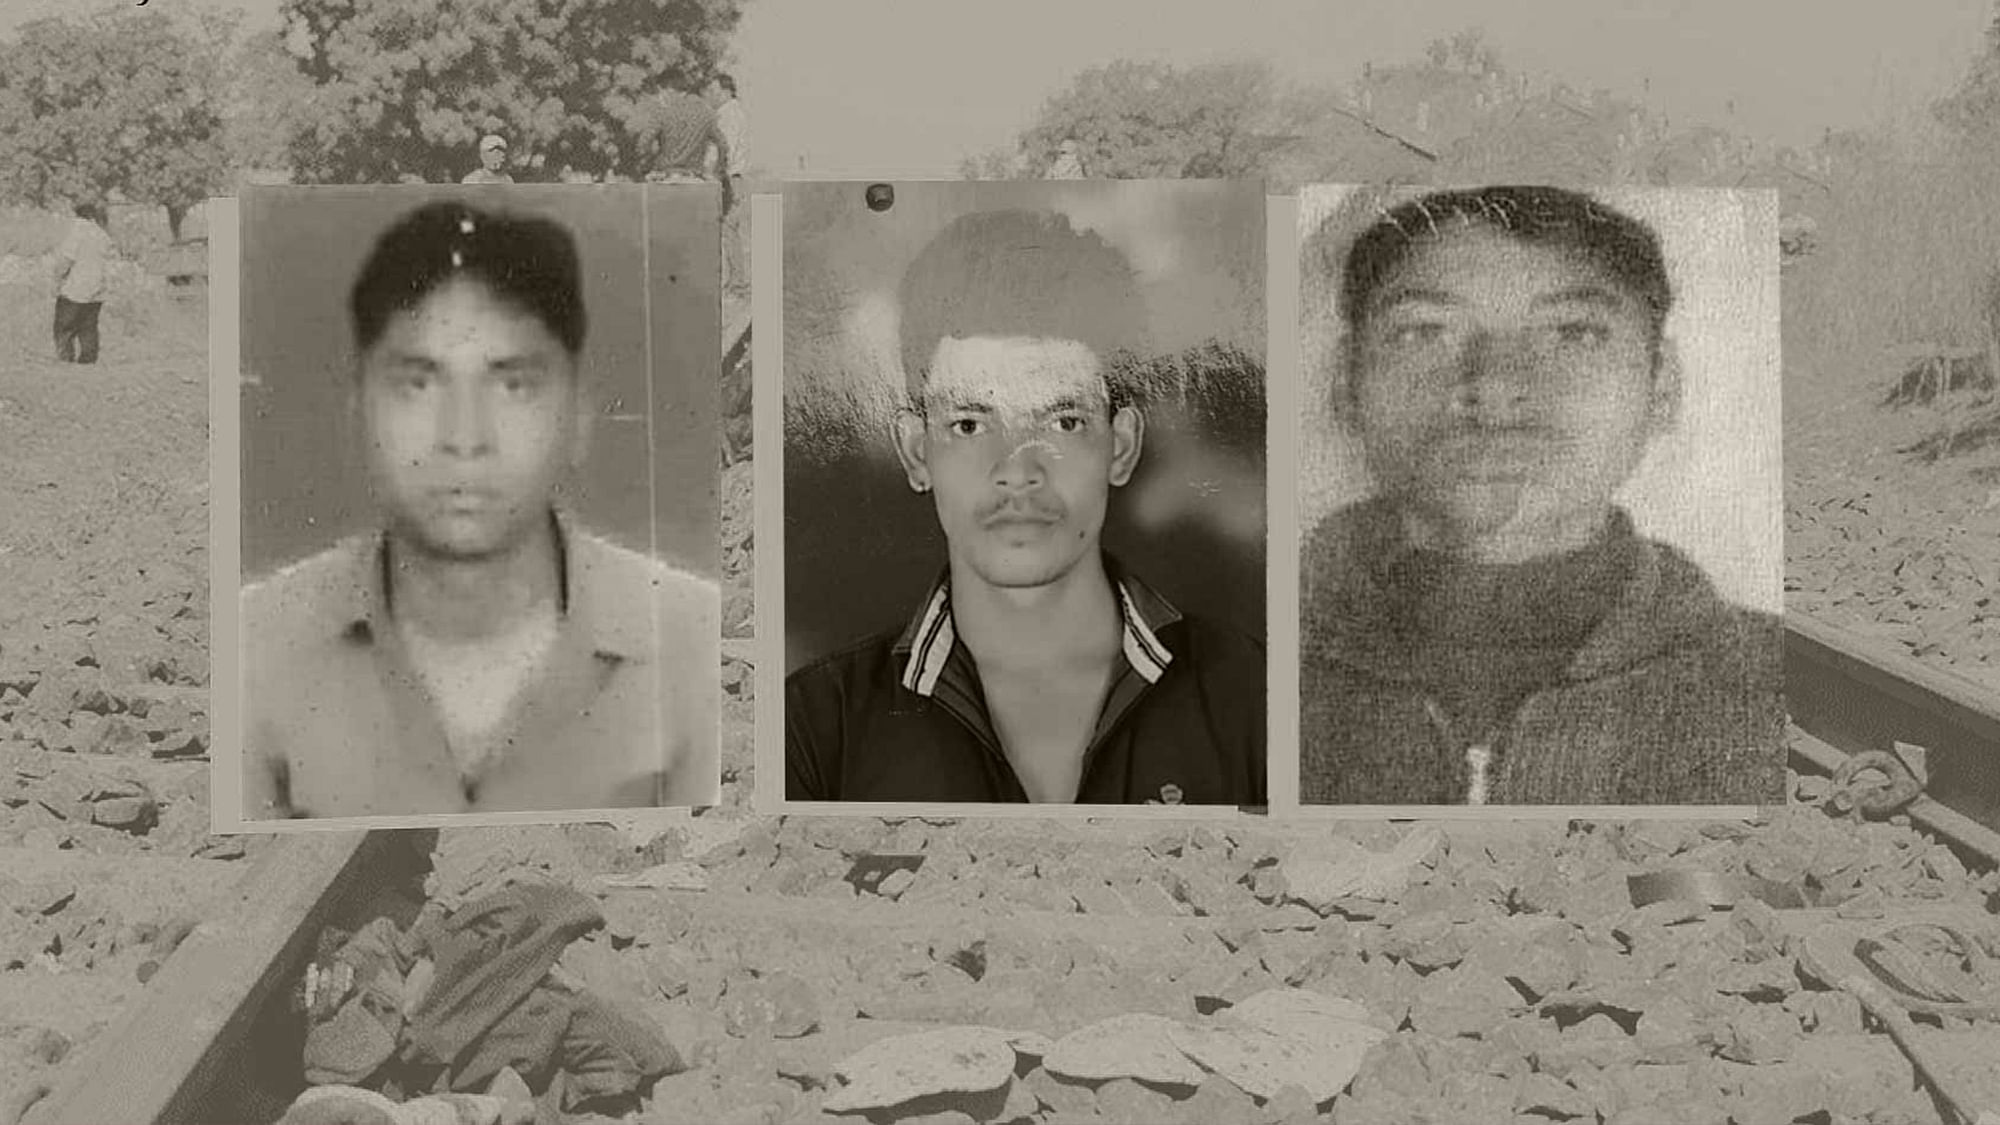 The kin of those killed in the Aurangabad train tragedy talk about the hardships they face.